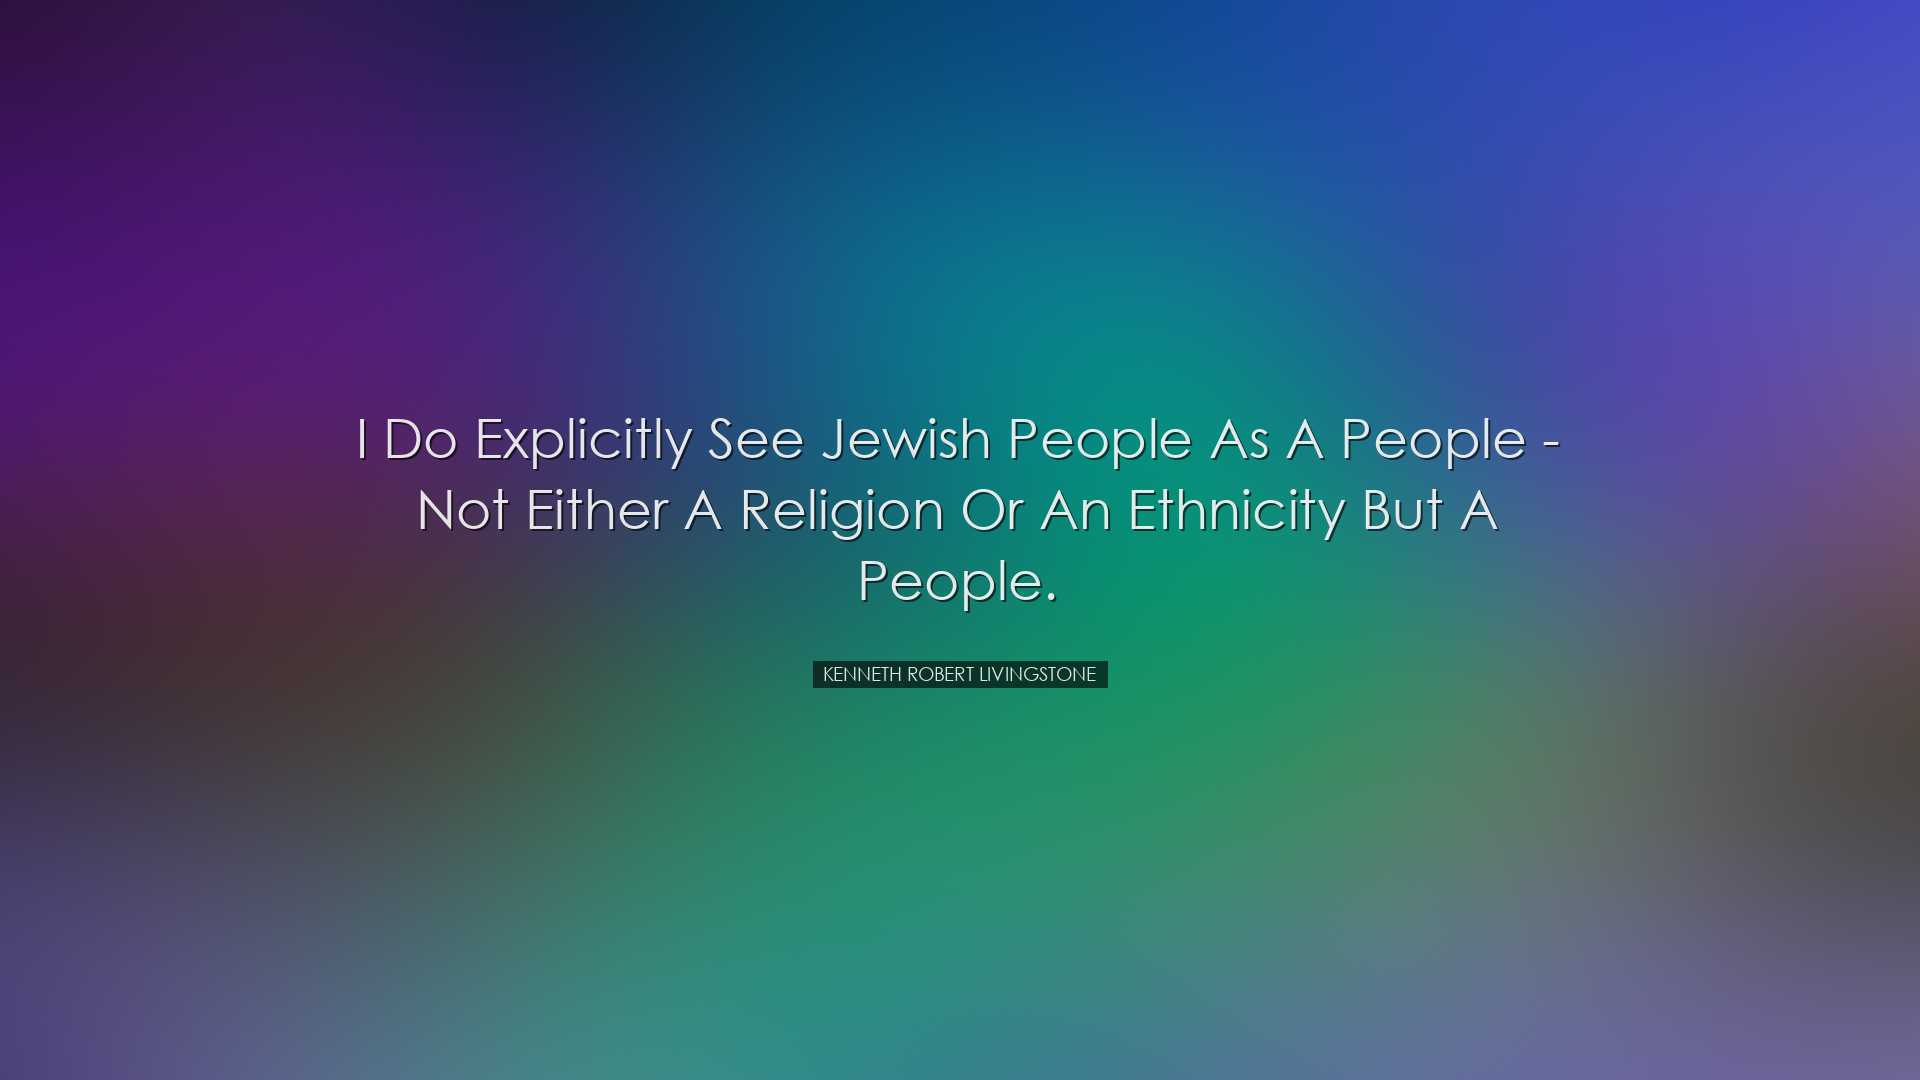 I do explicitly see Jewish people as a people - not either a relig